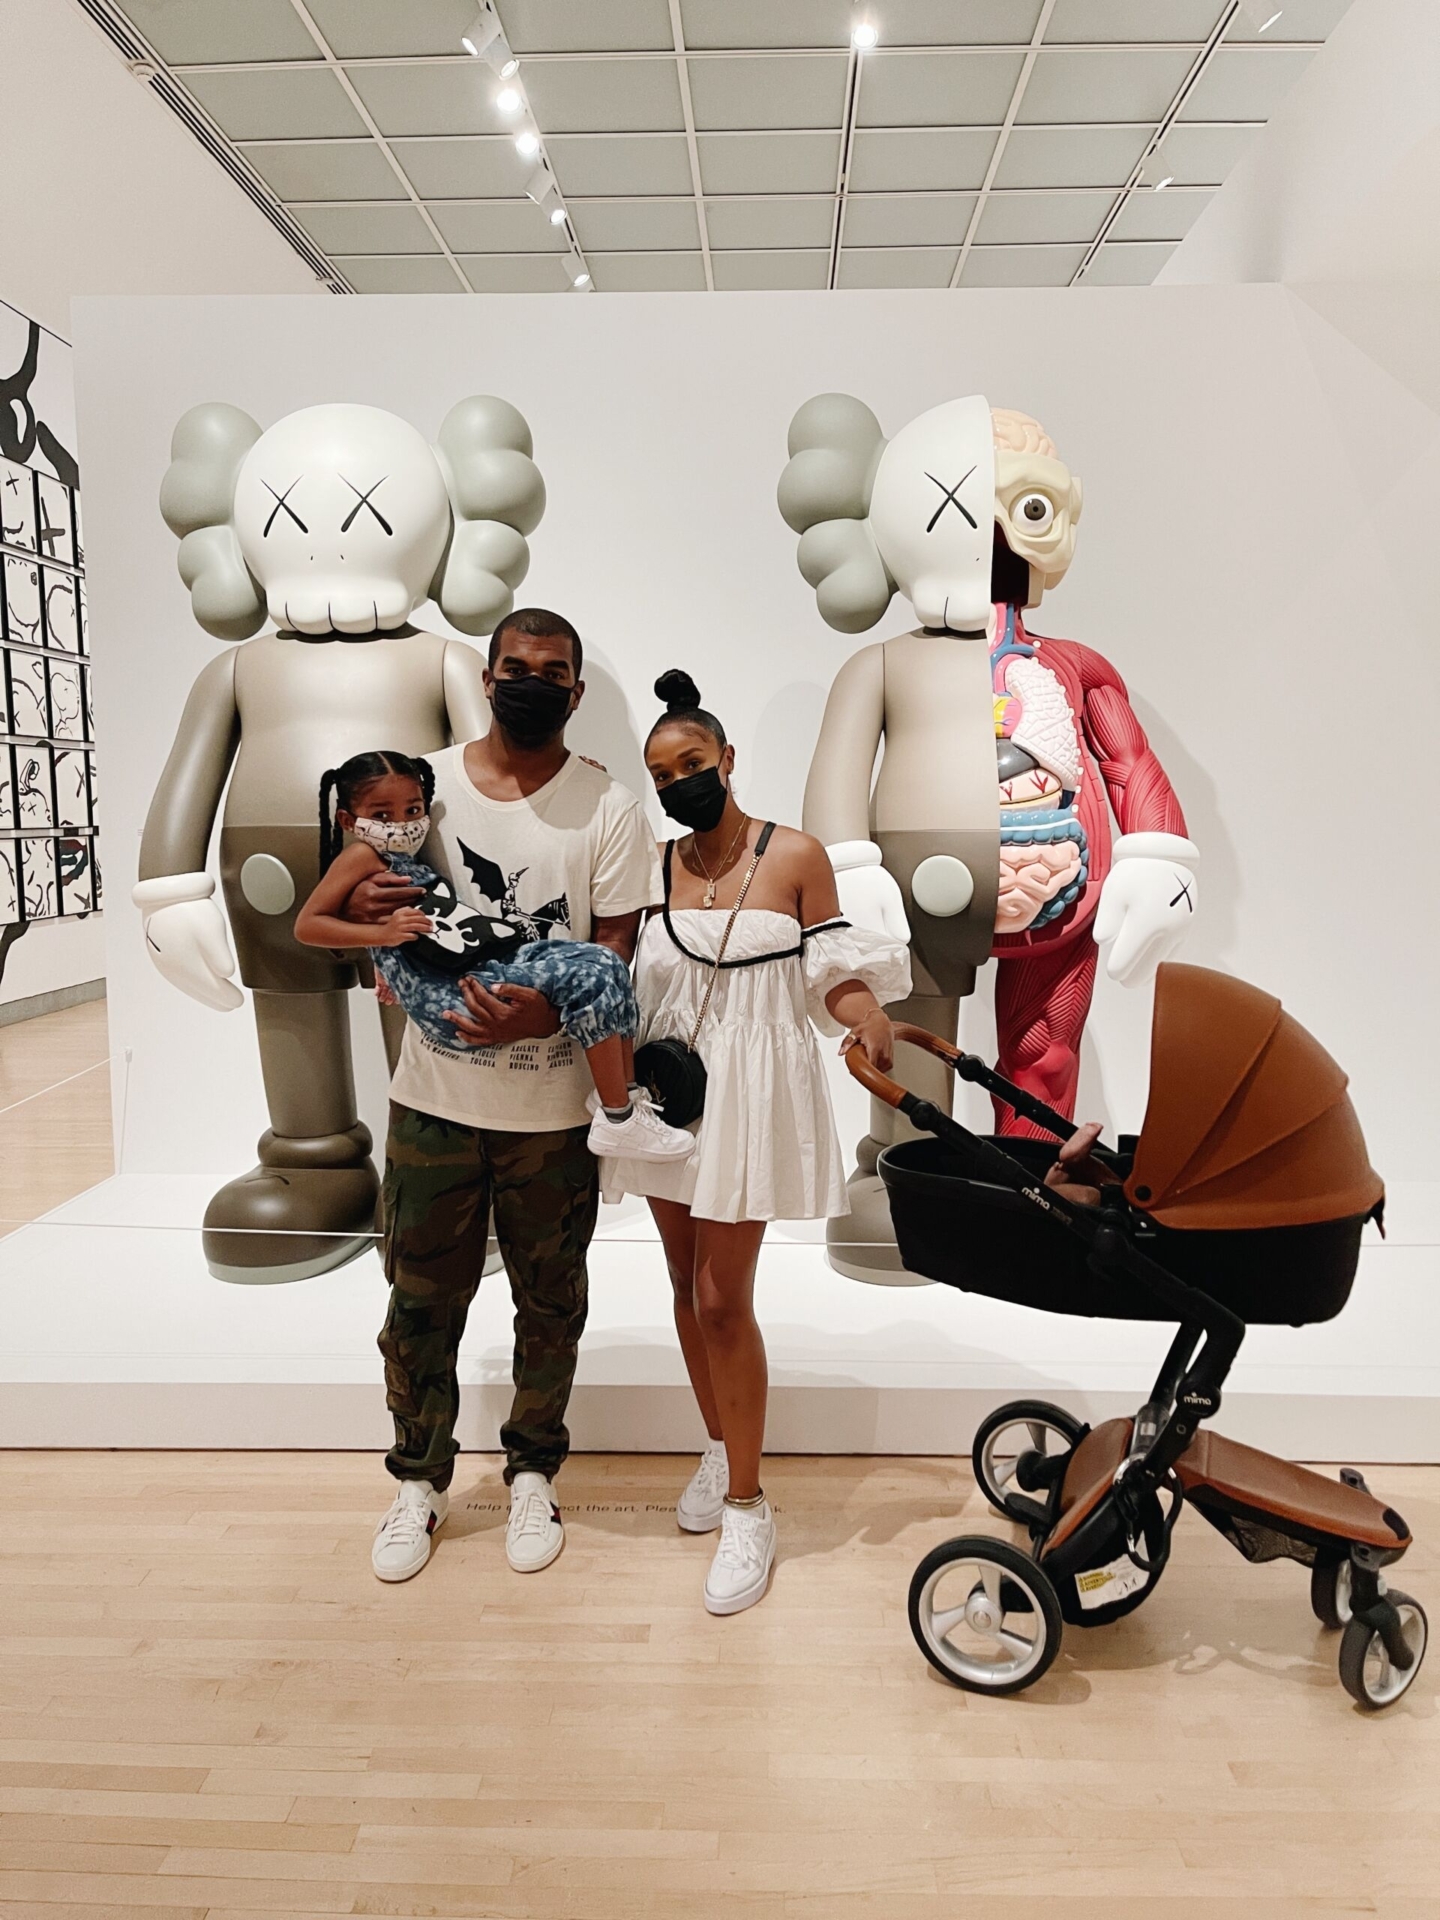 OUR VISIT TO KAWS: WHAT PARTY